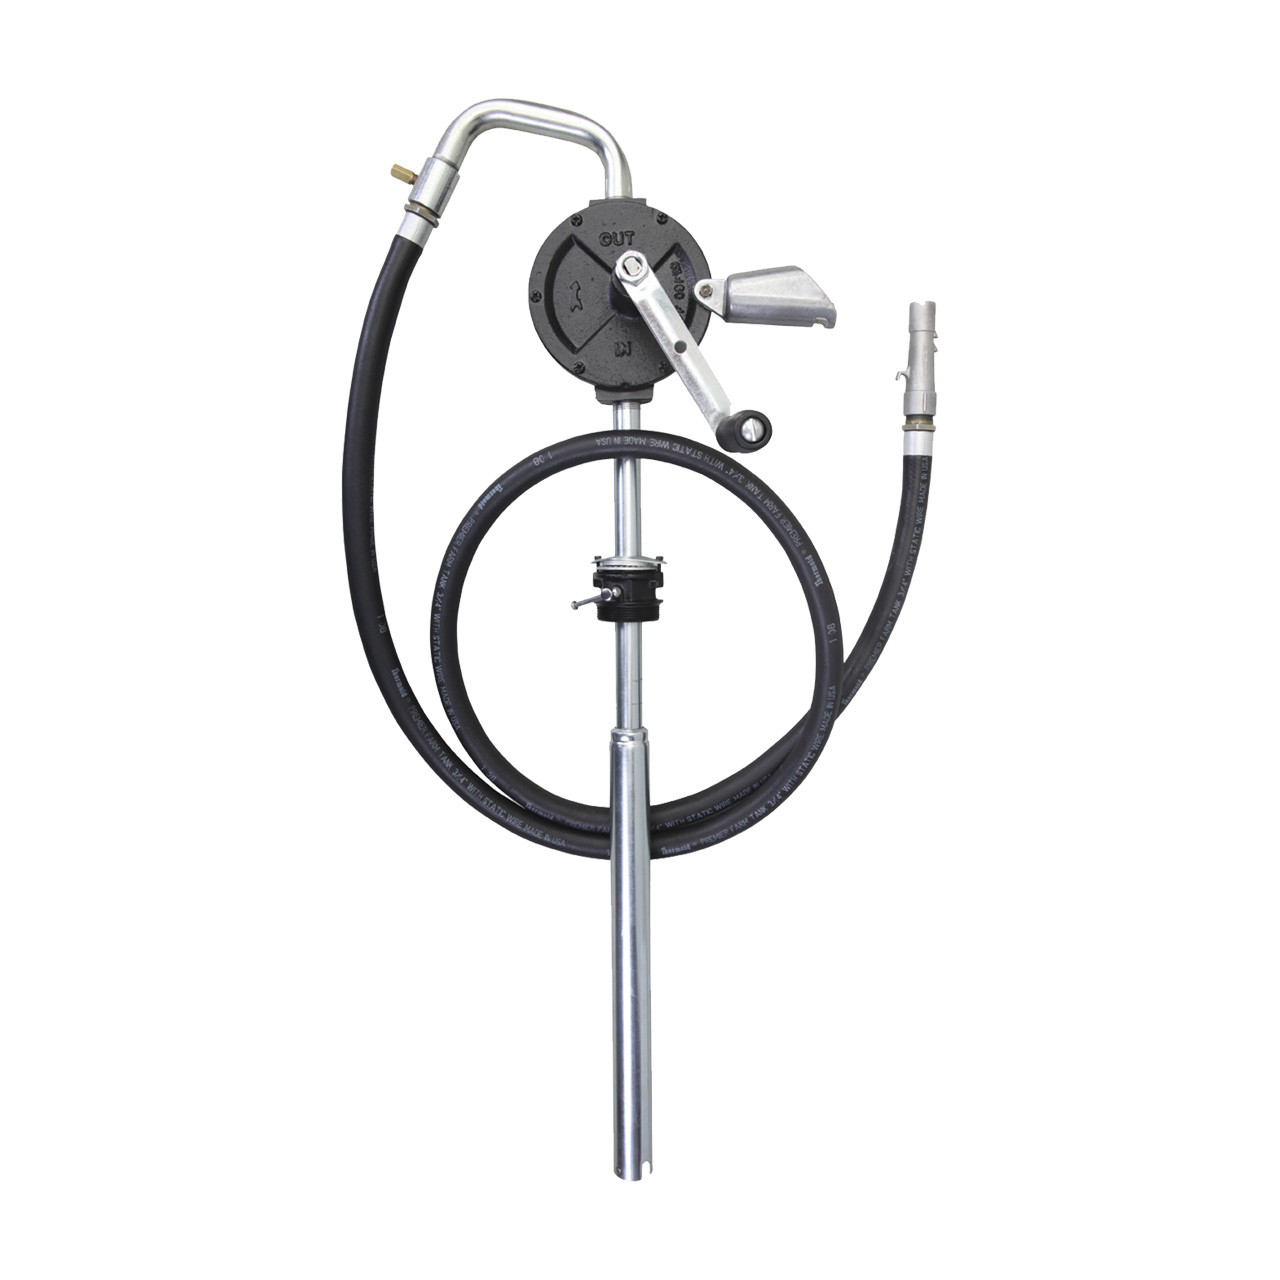 Cast iron hand operated rotary pump for 15-55 gallon drums